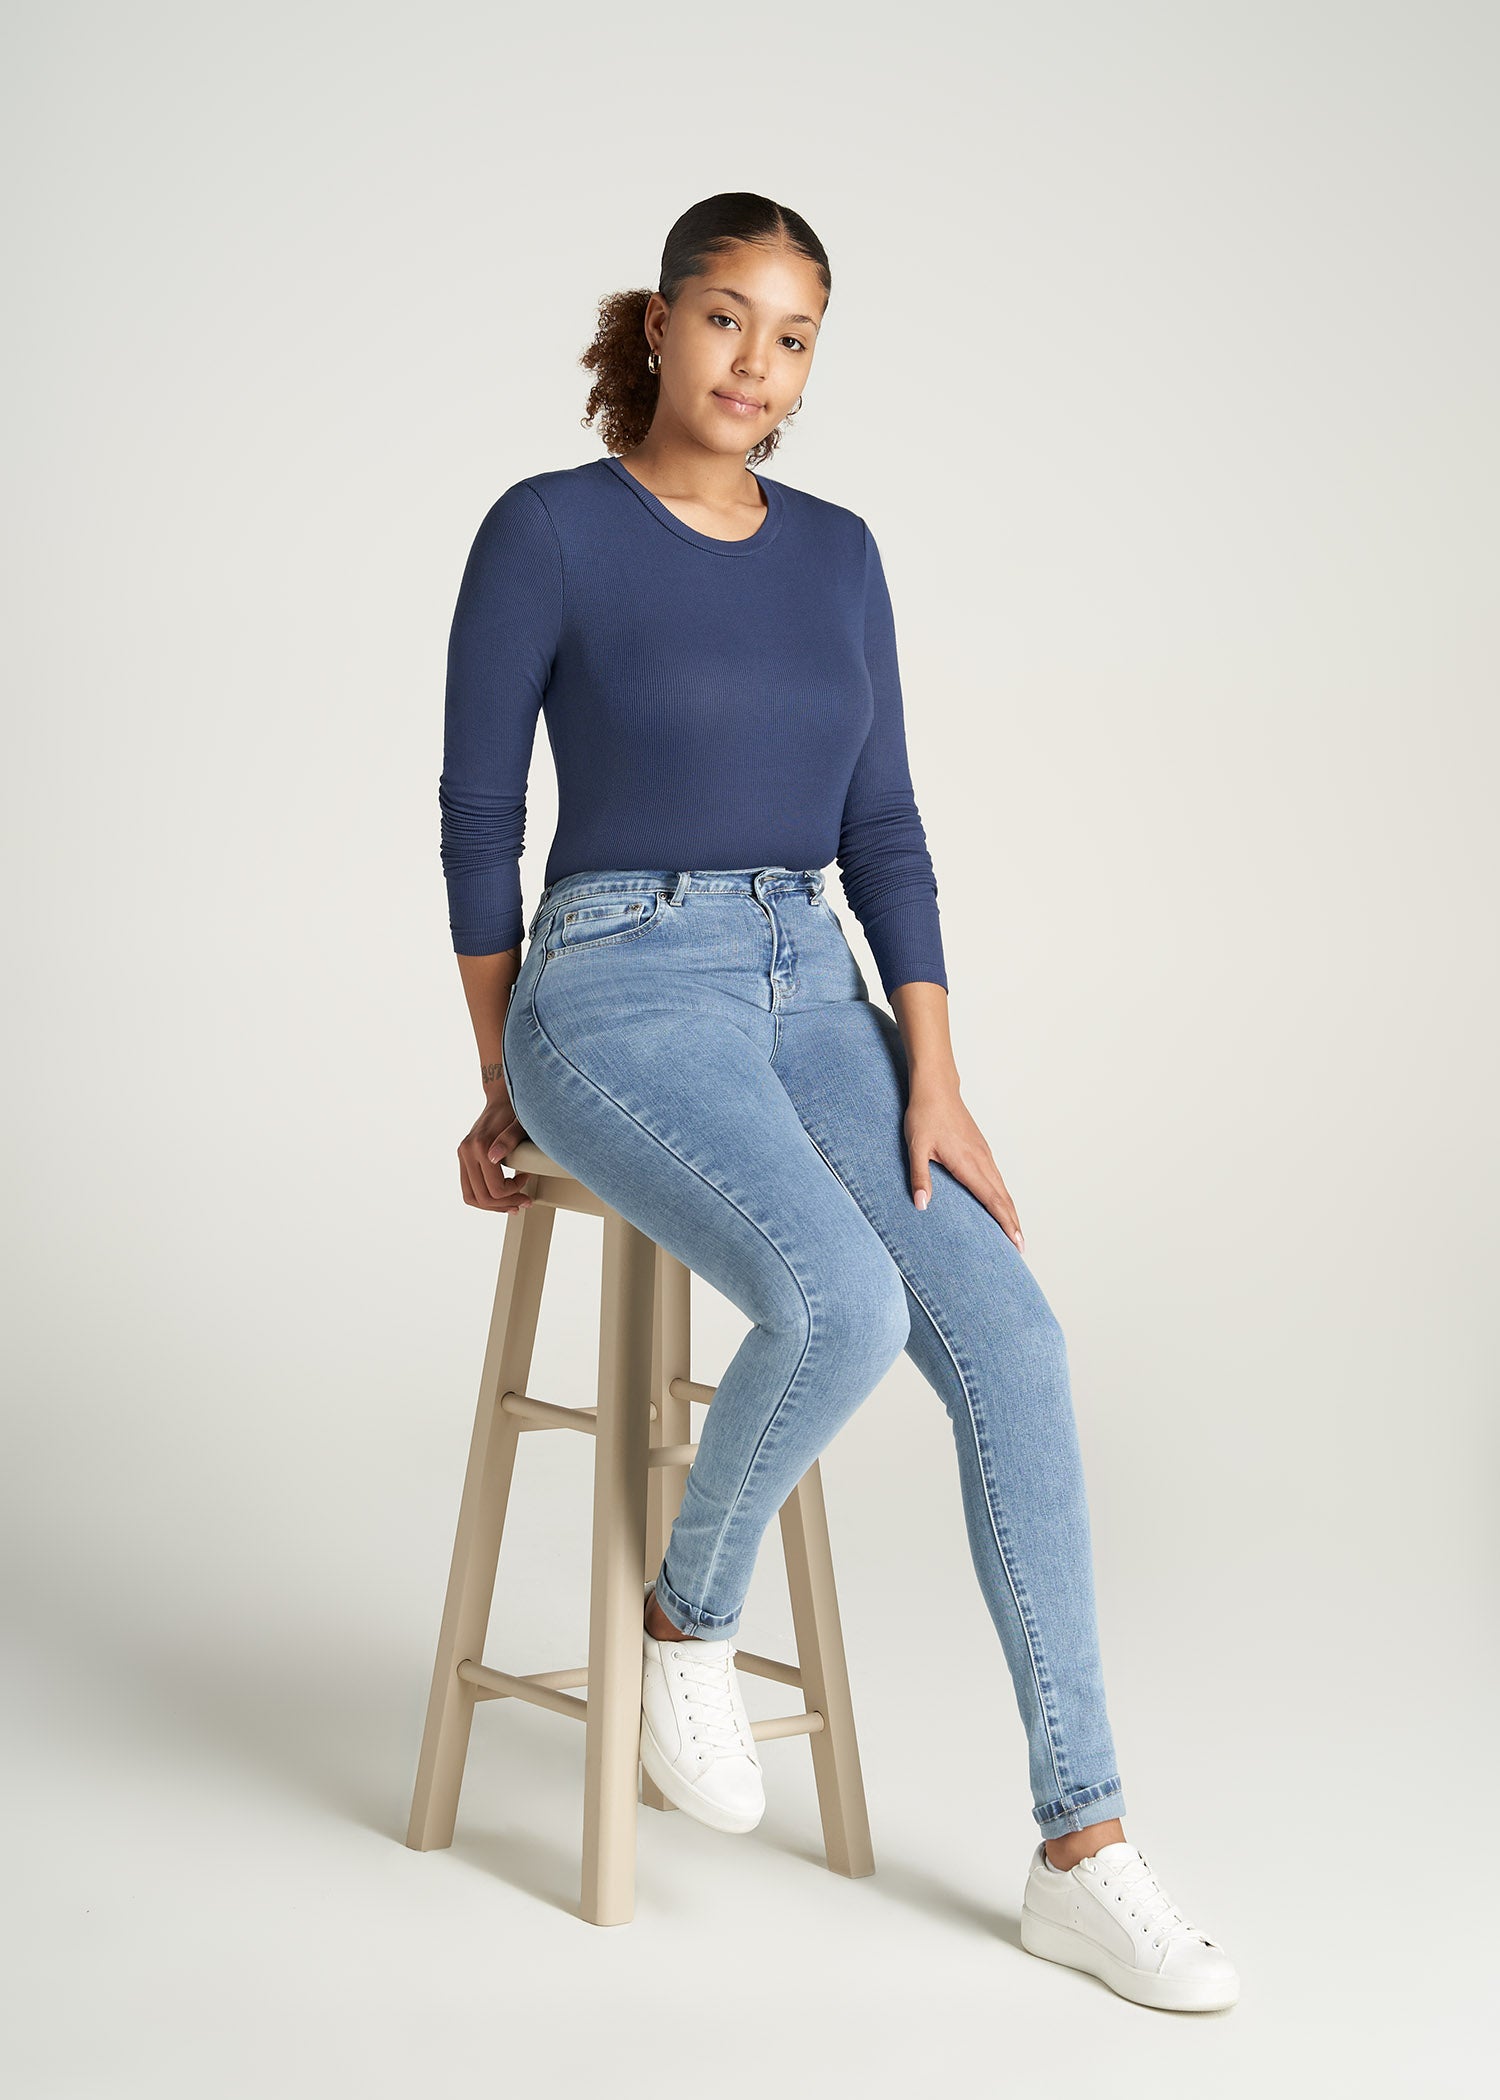 FITTED Ribbed Long Sleeve Tee in Navy - Tall Women's Shirts